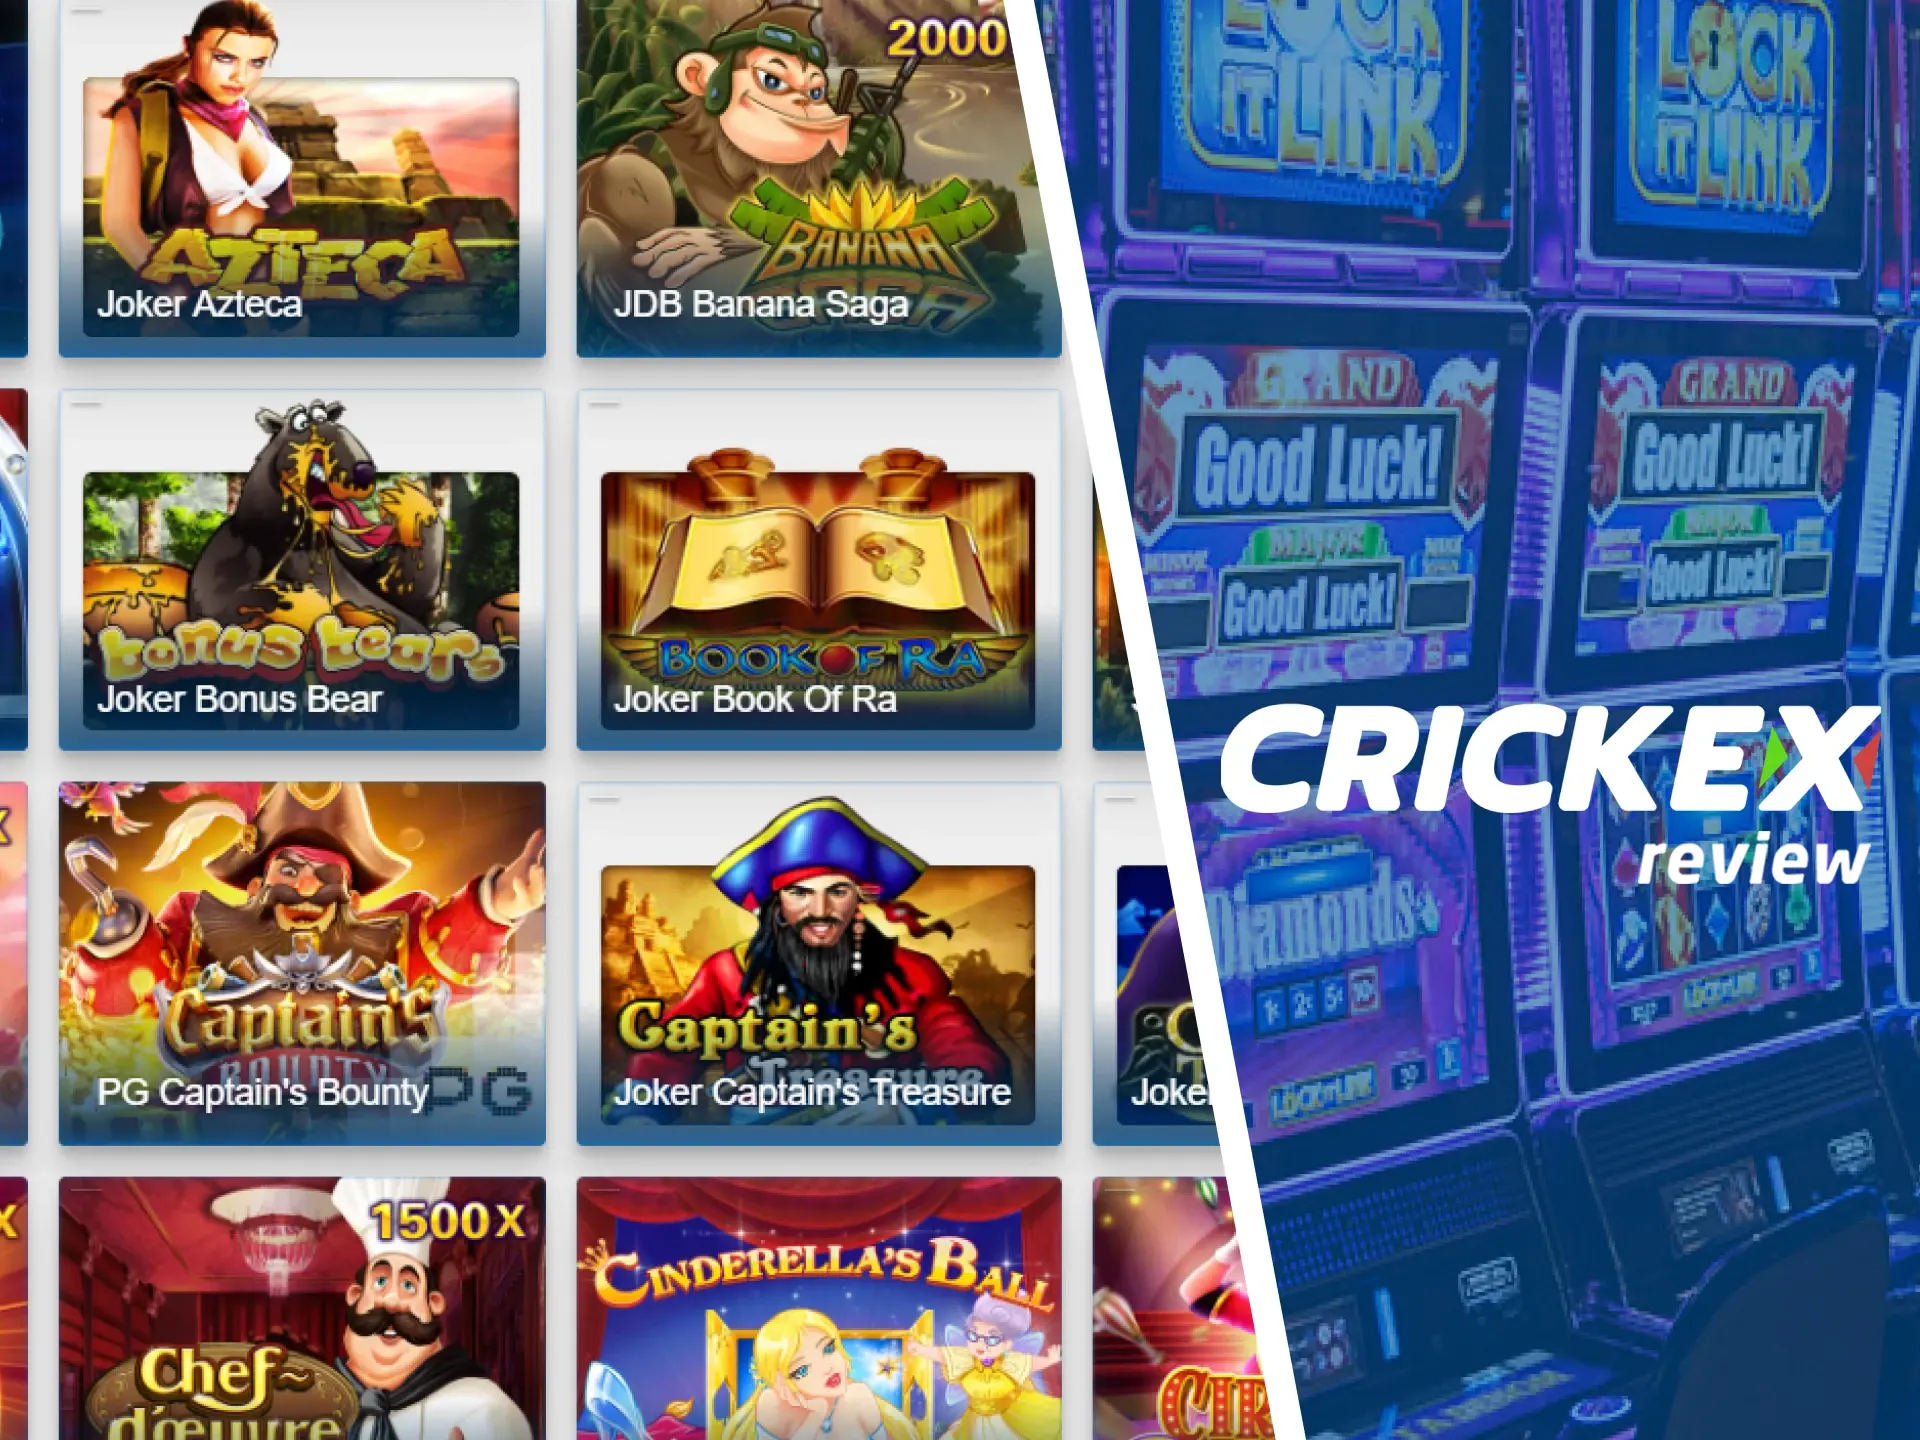 Spin your favorite slots in the Crickex casino.